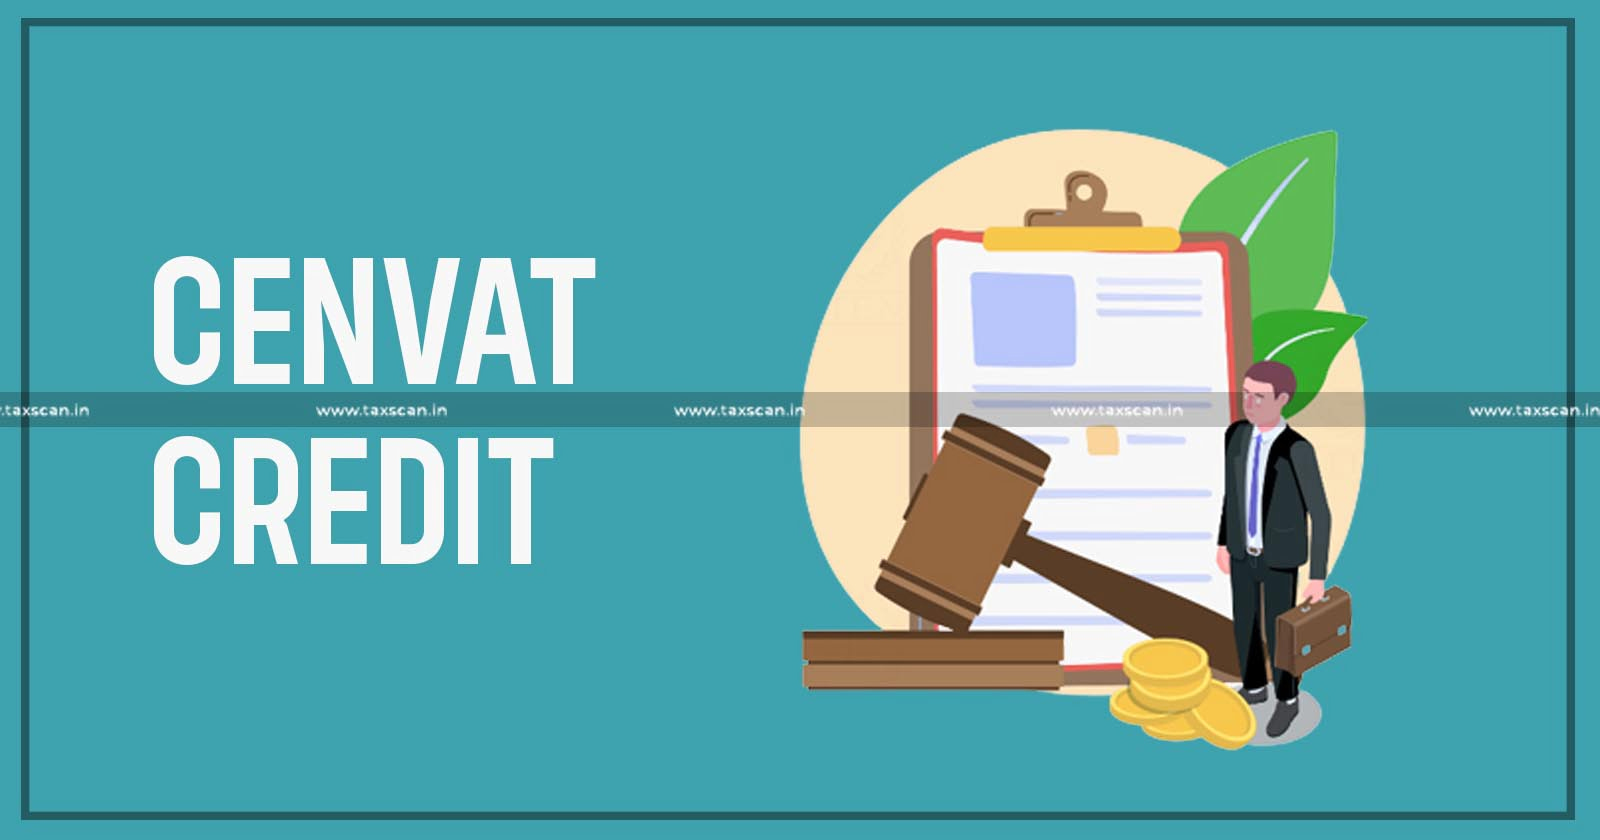 CENVAT Credit - Excise duty -Final product - Central Excise Act - CCR-CESTAT-TAXSCAN